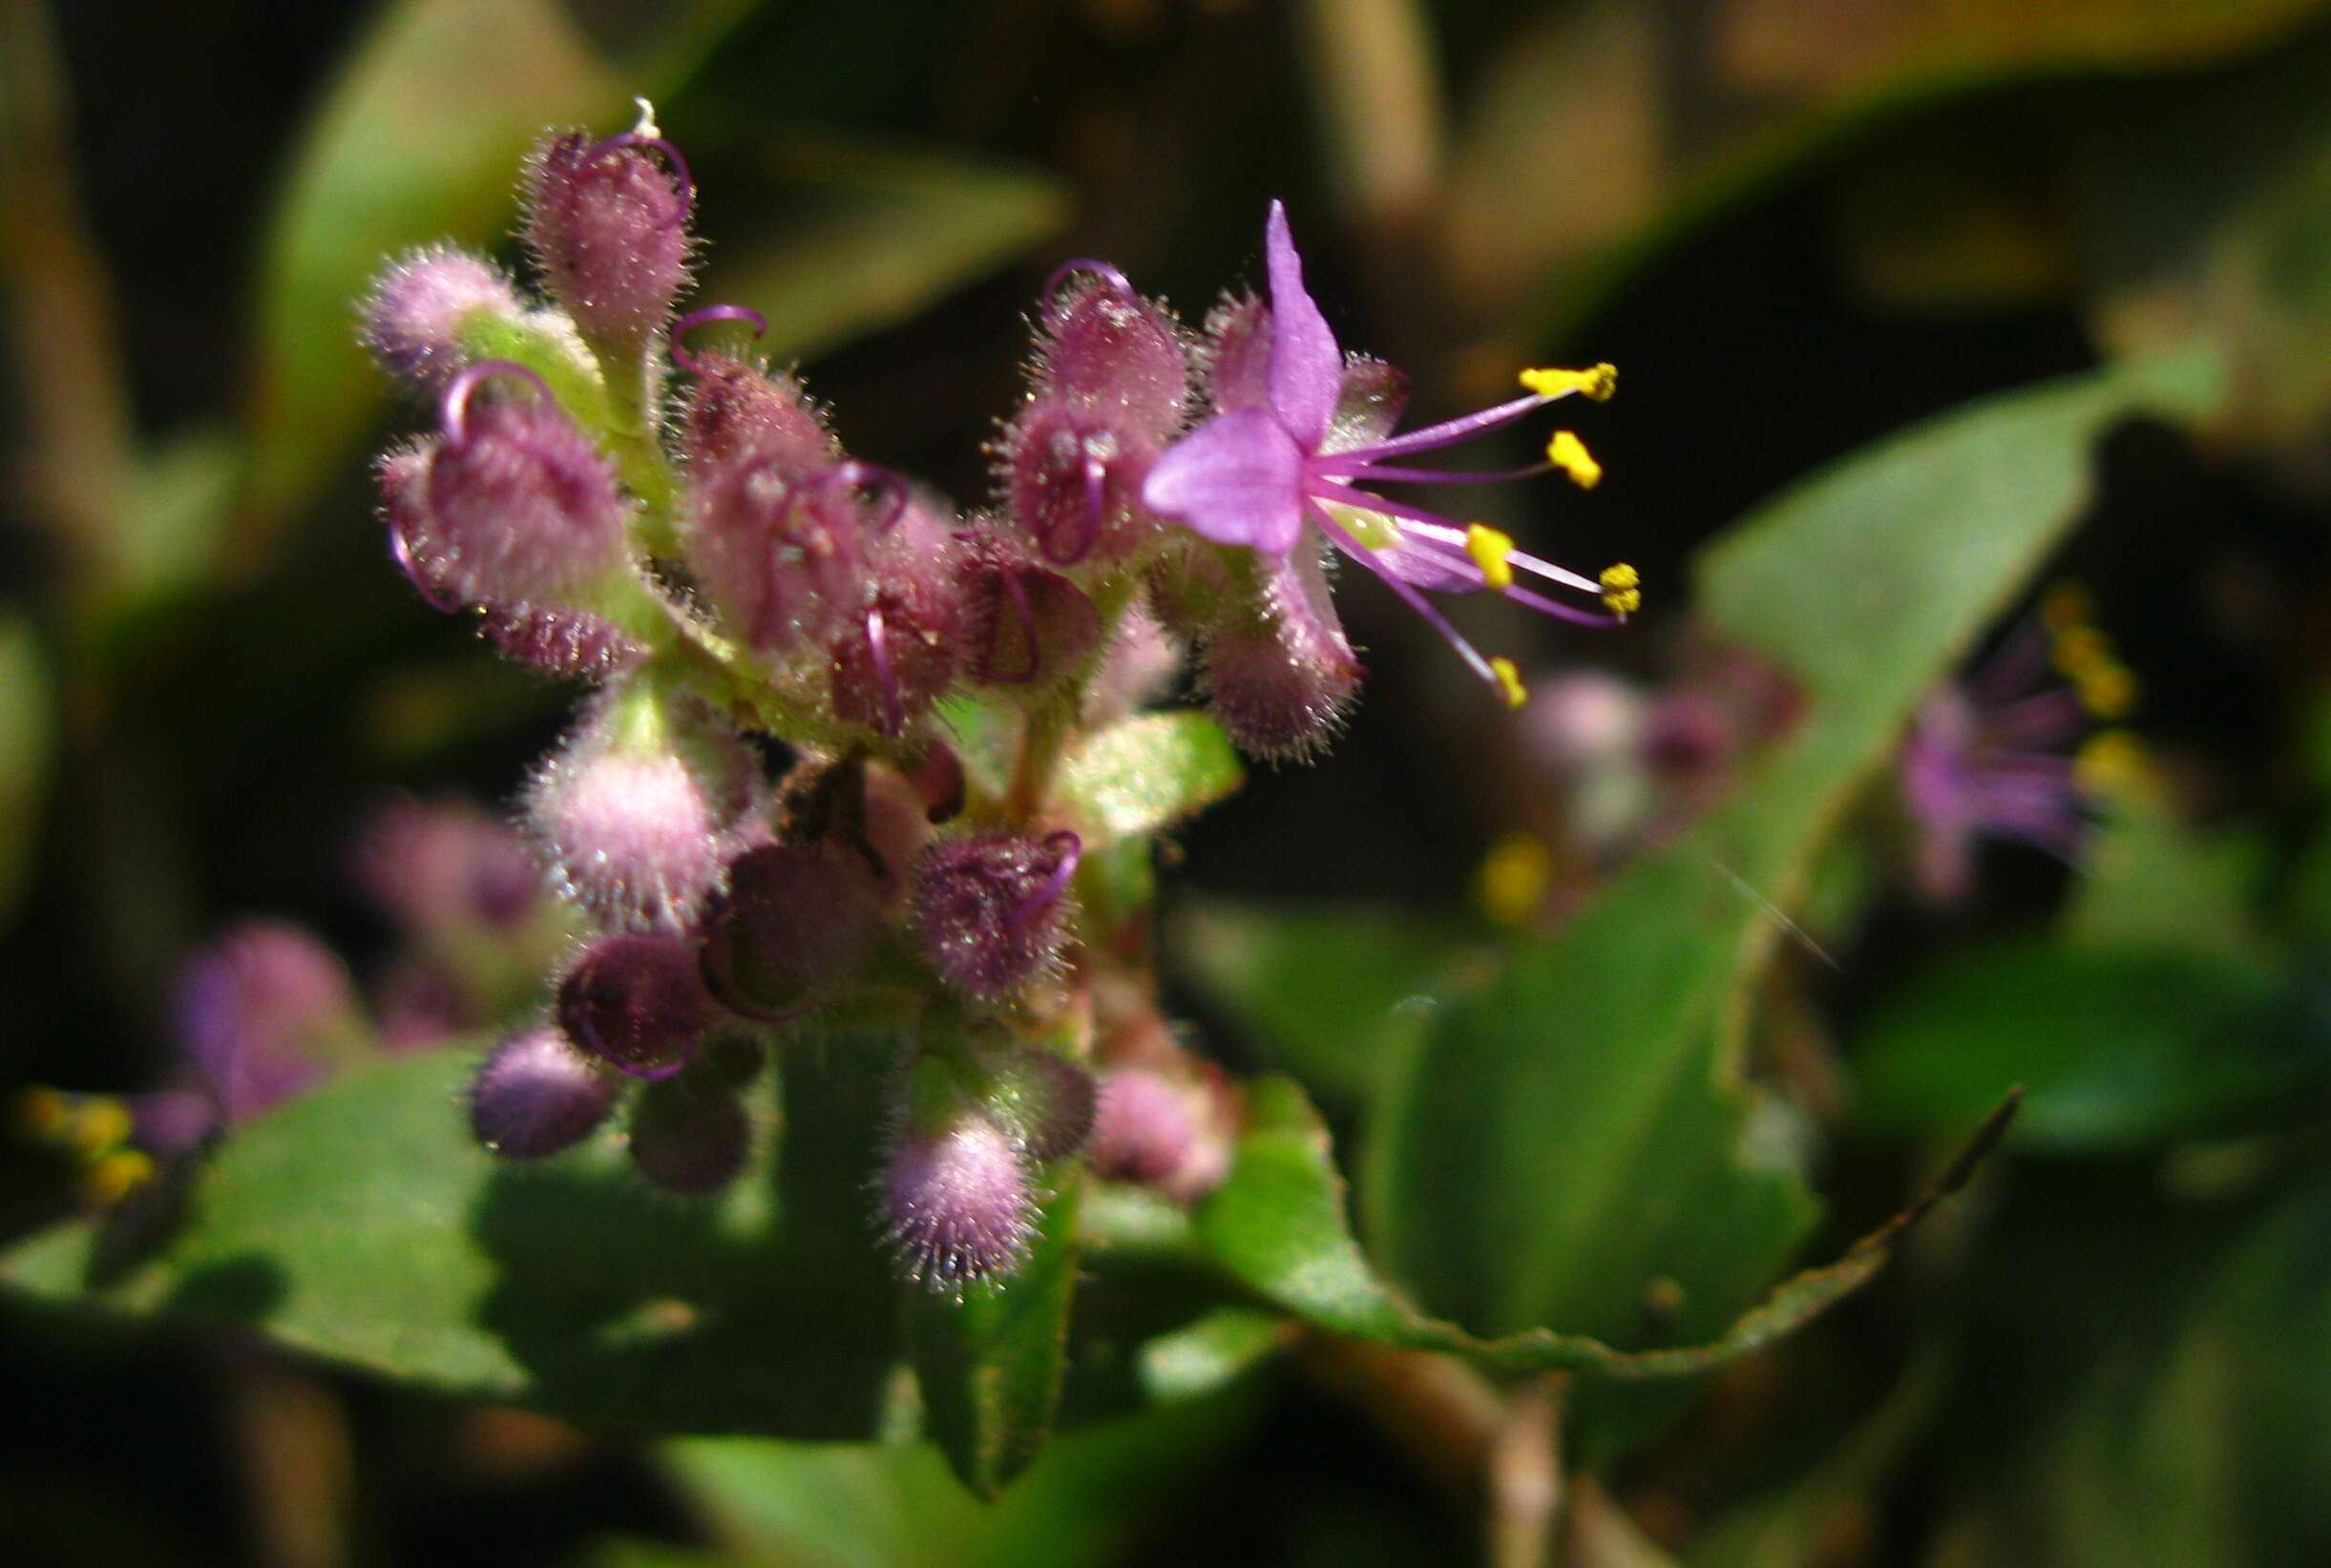 Image of Climbing Flower Cup